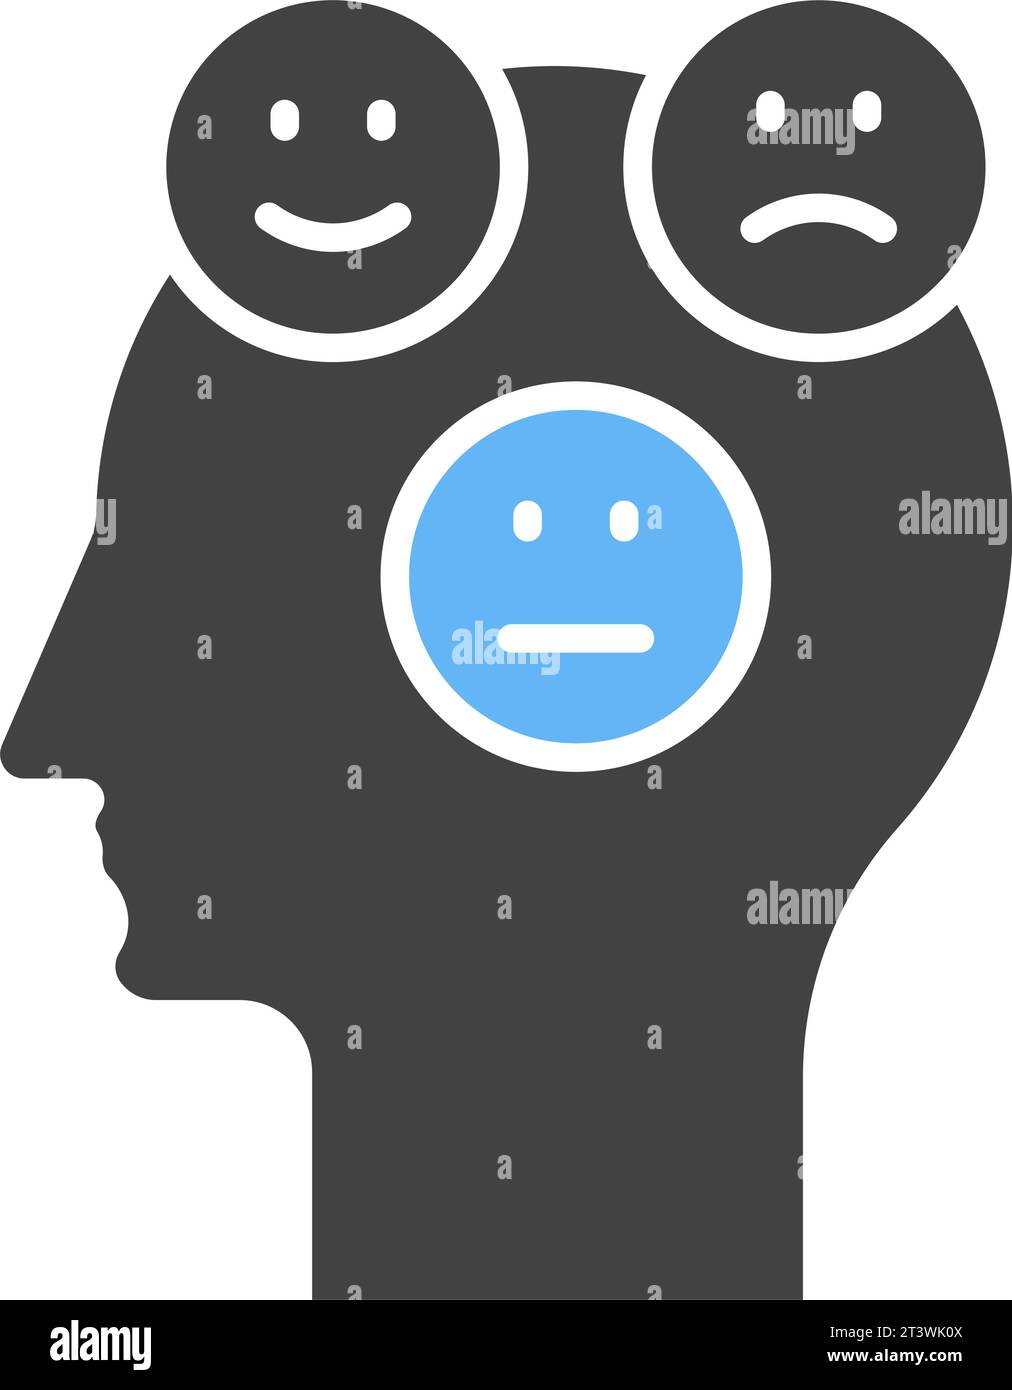 Emotions icon vector image. Stock Vector